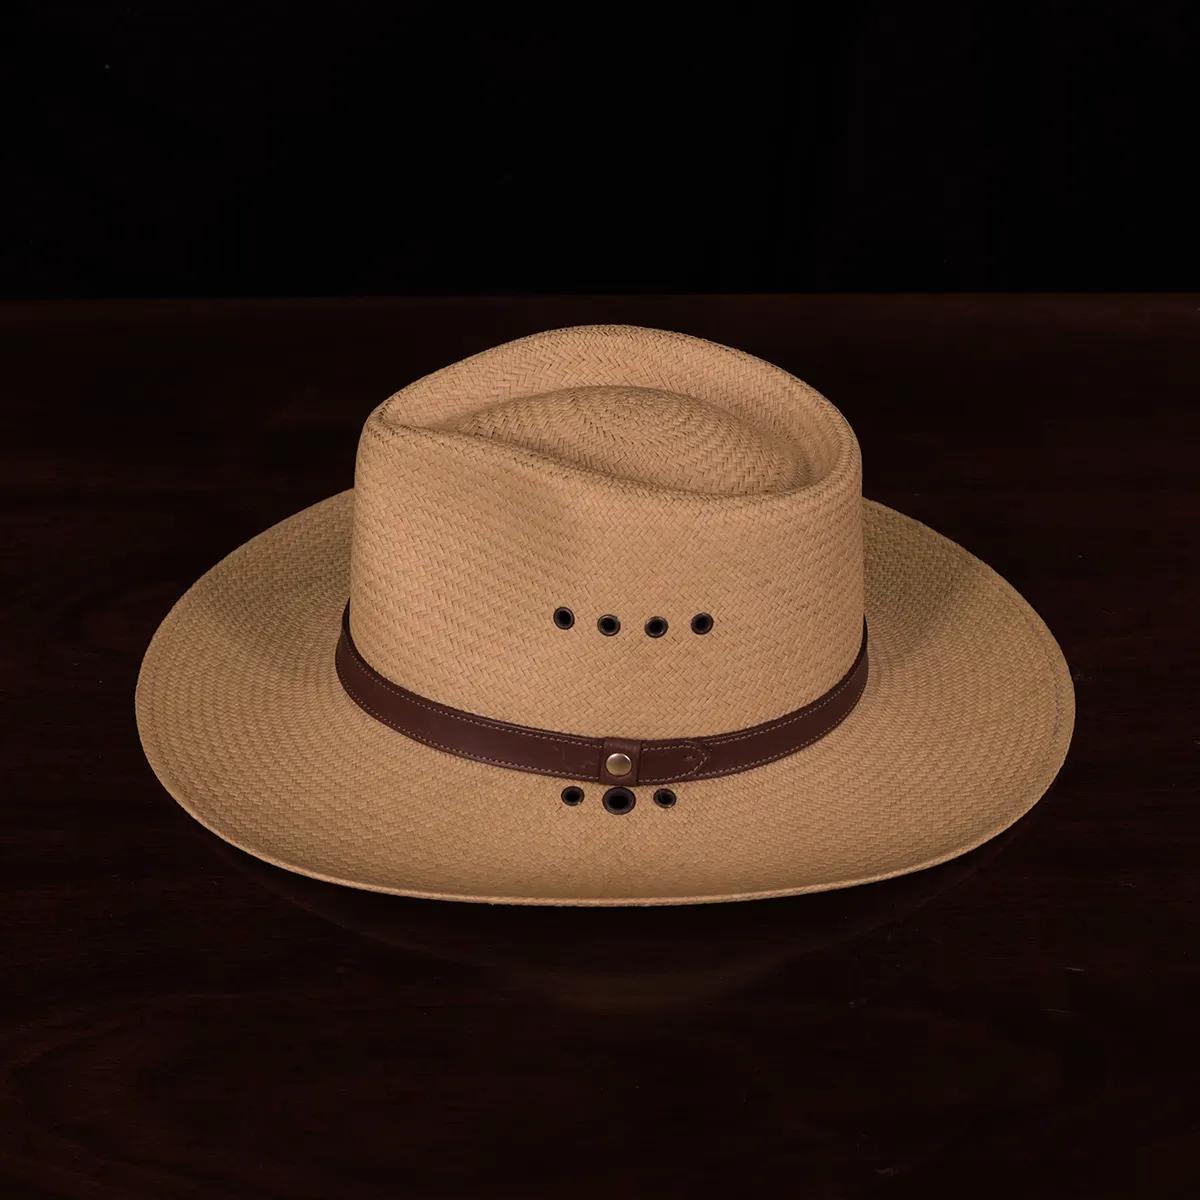 No. 2 Lynnville Panama Hat in the color Khaki showing the side